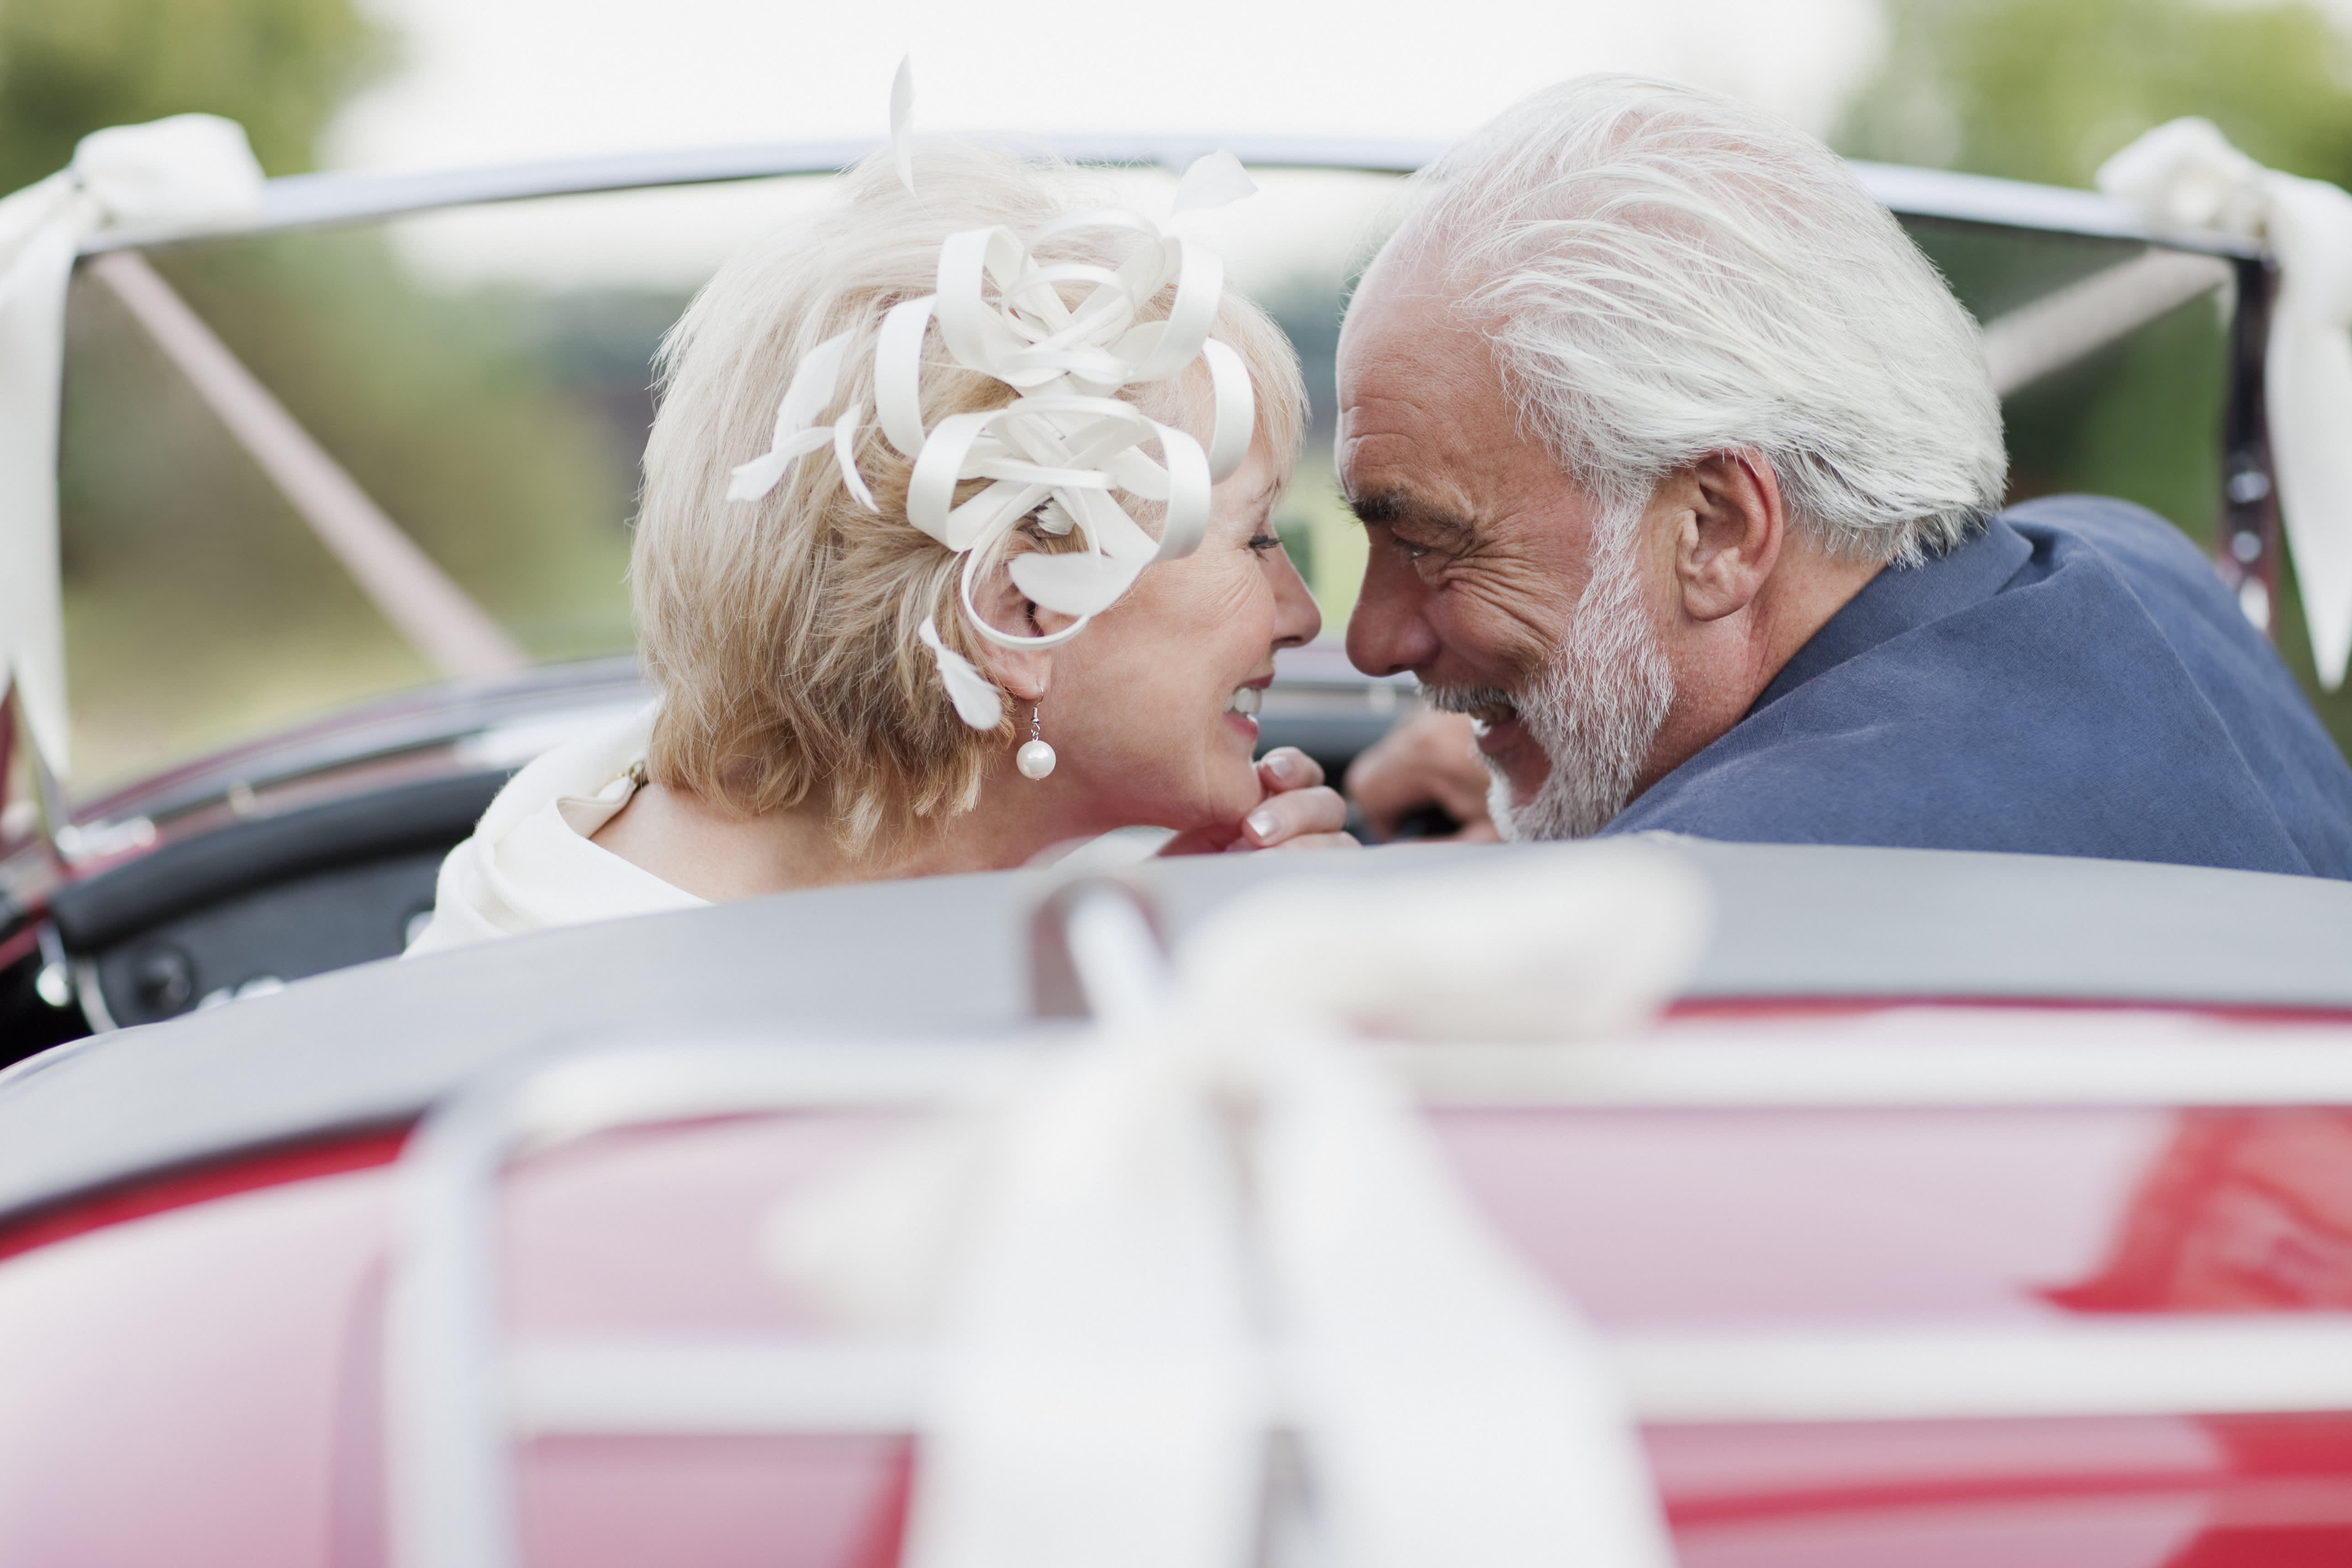 Older and engaged? Here are 5